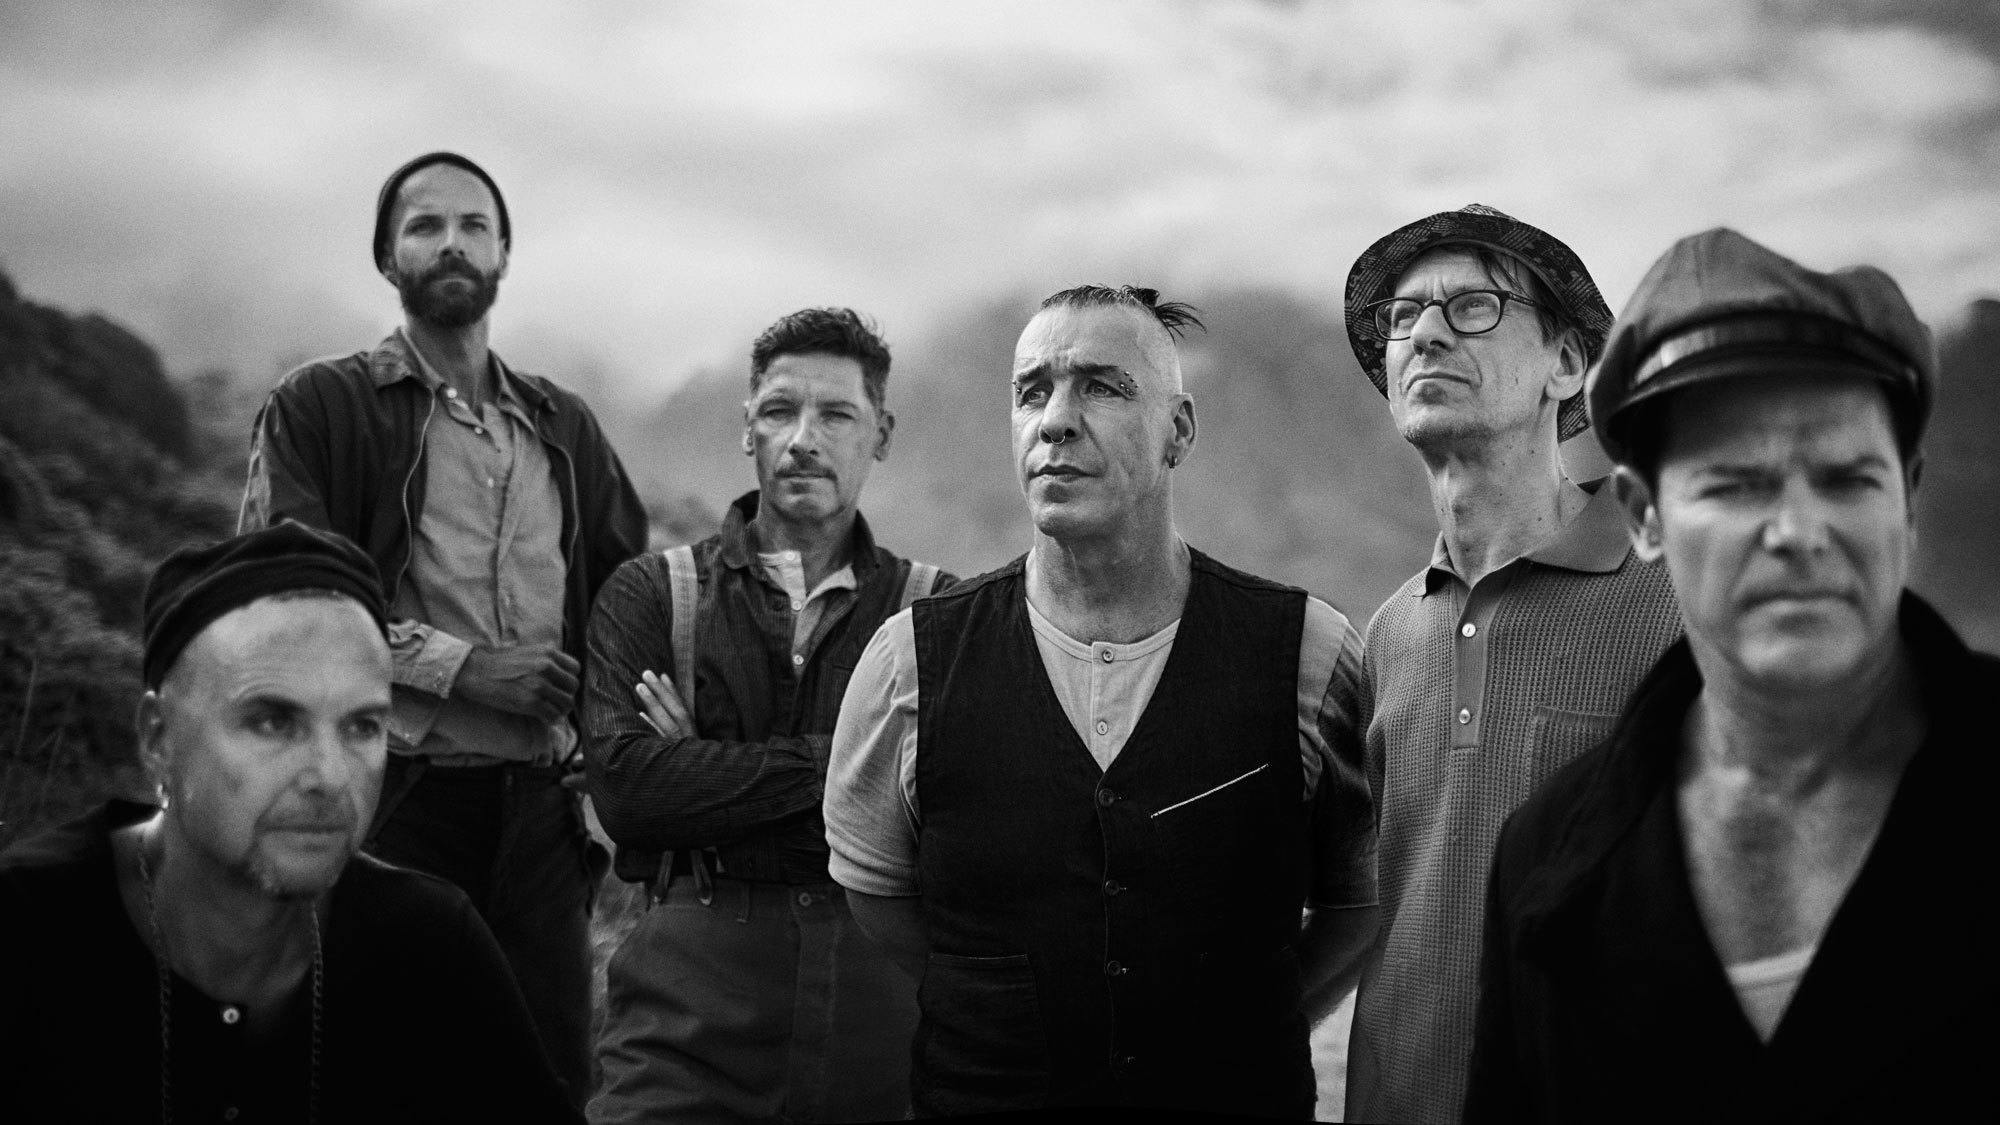 The new Rammstein album is "expected to be released next year before the tour"